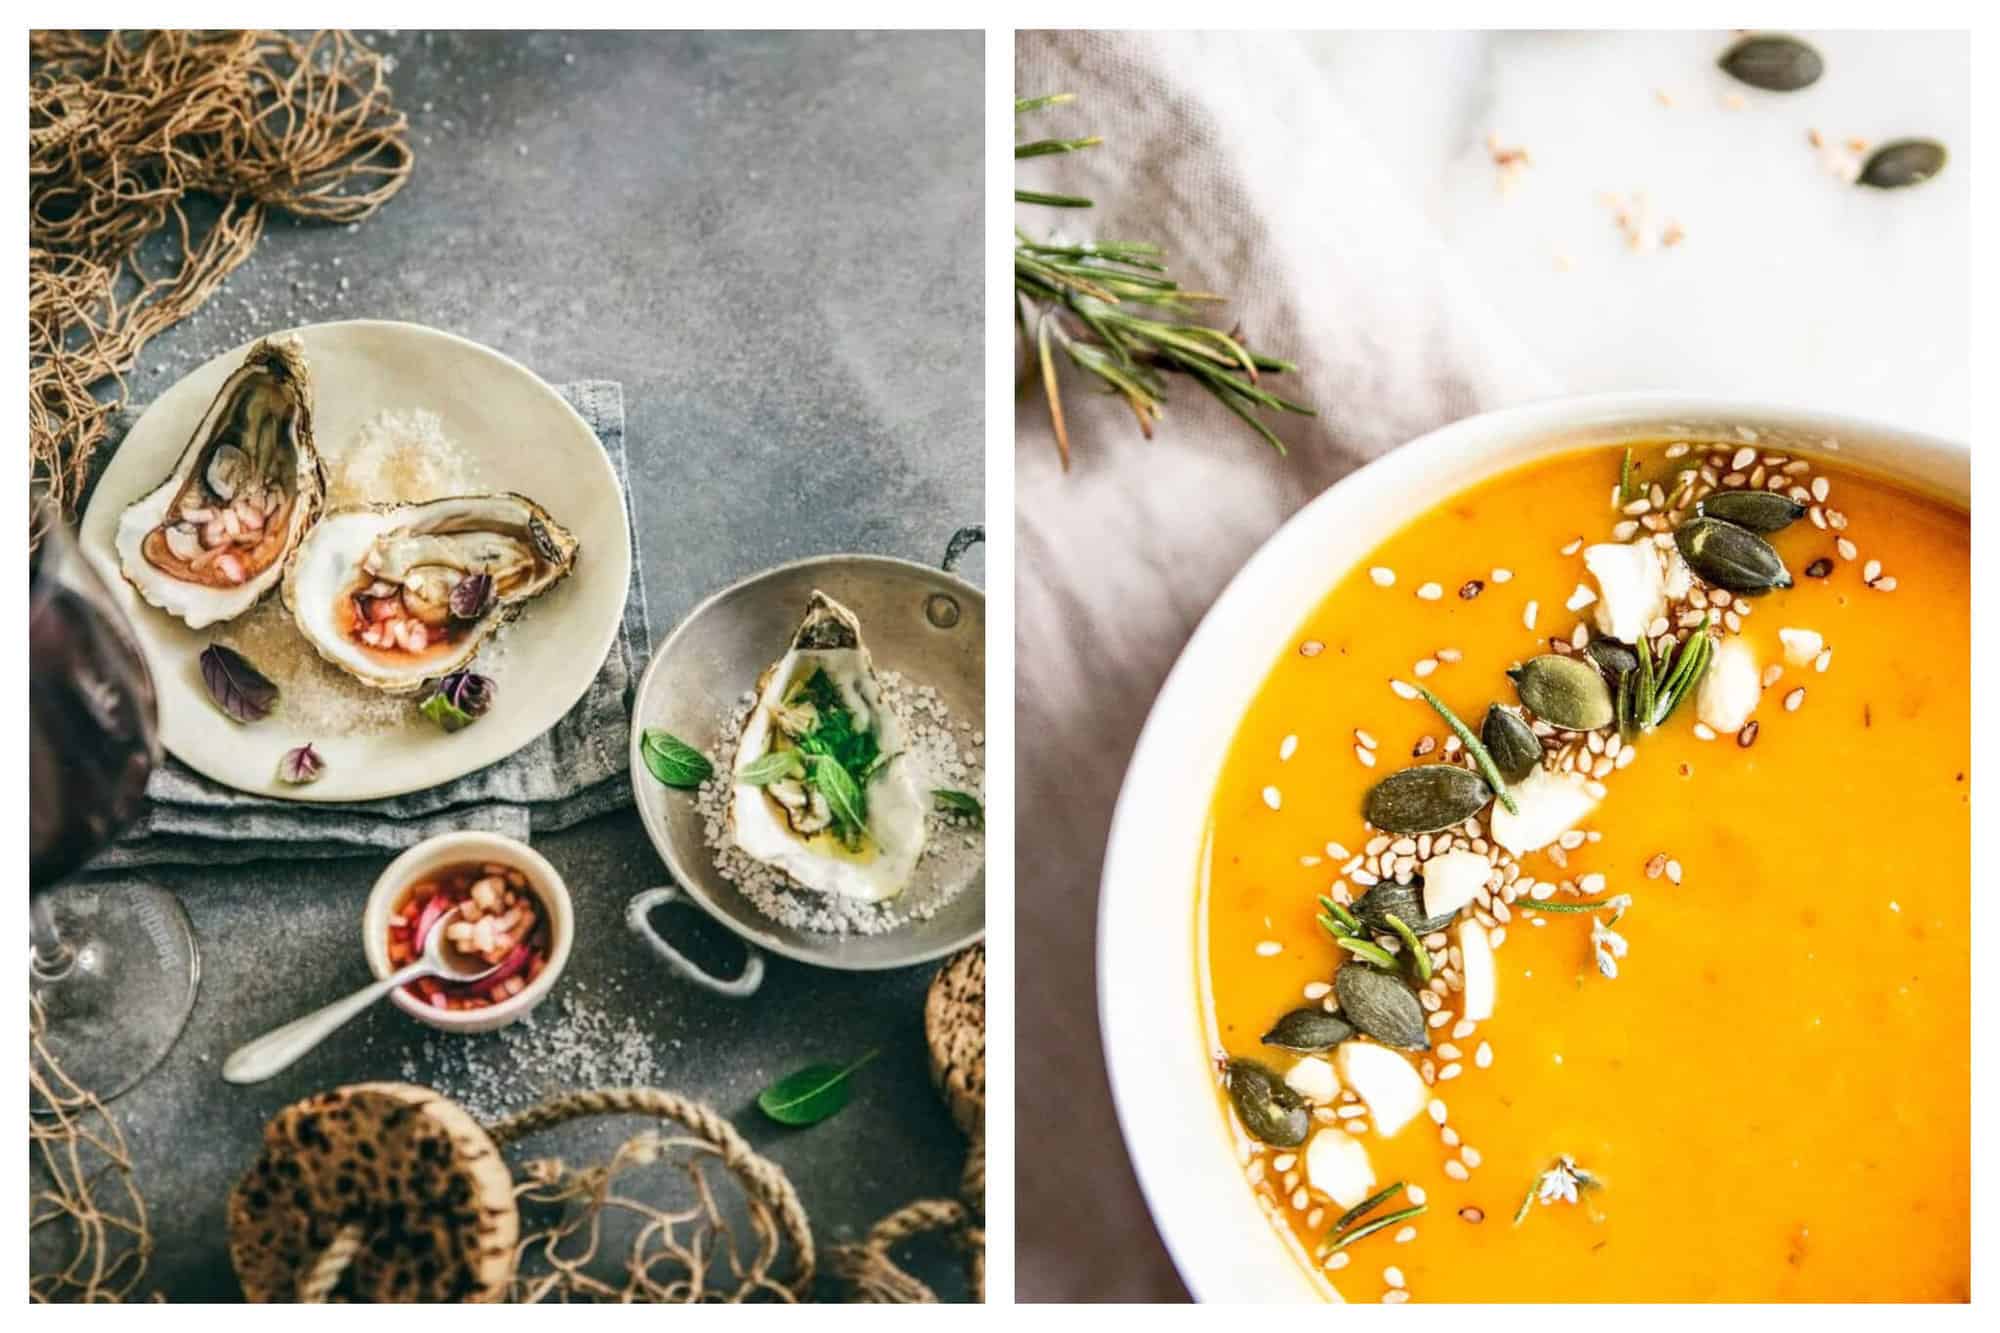 Left: Oysters and garnishes are pictured on a stone colored surface. Right: An orange soup, garnished with various seeds is pictured on top of a marble countertop.